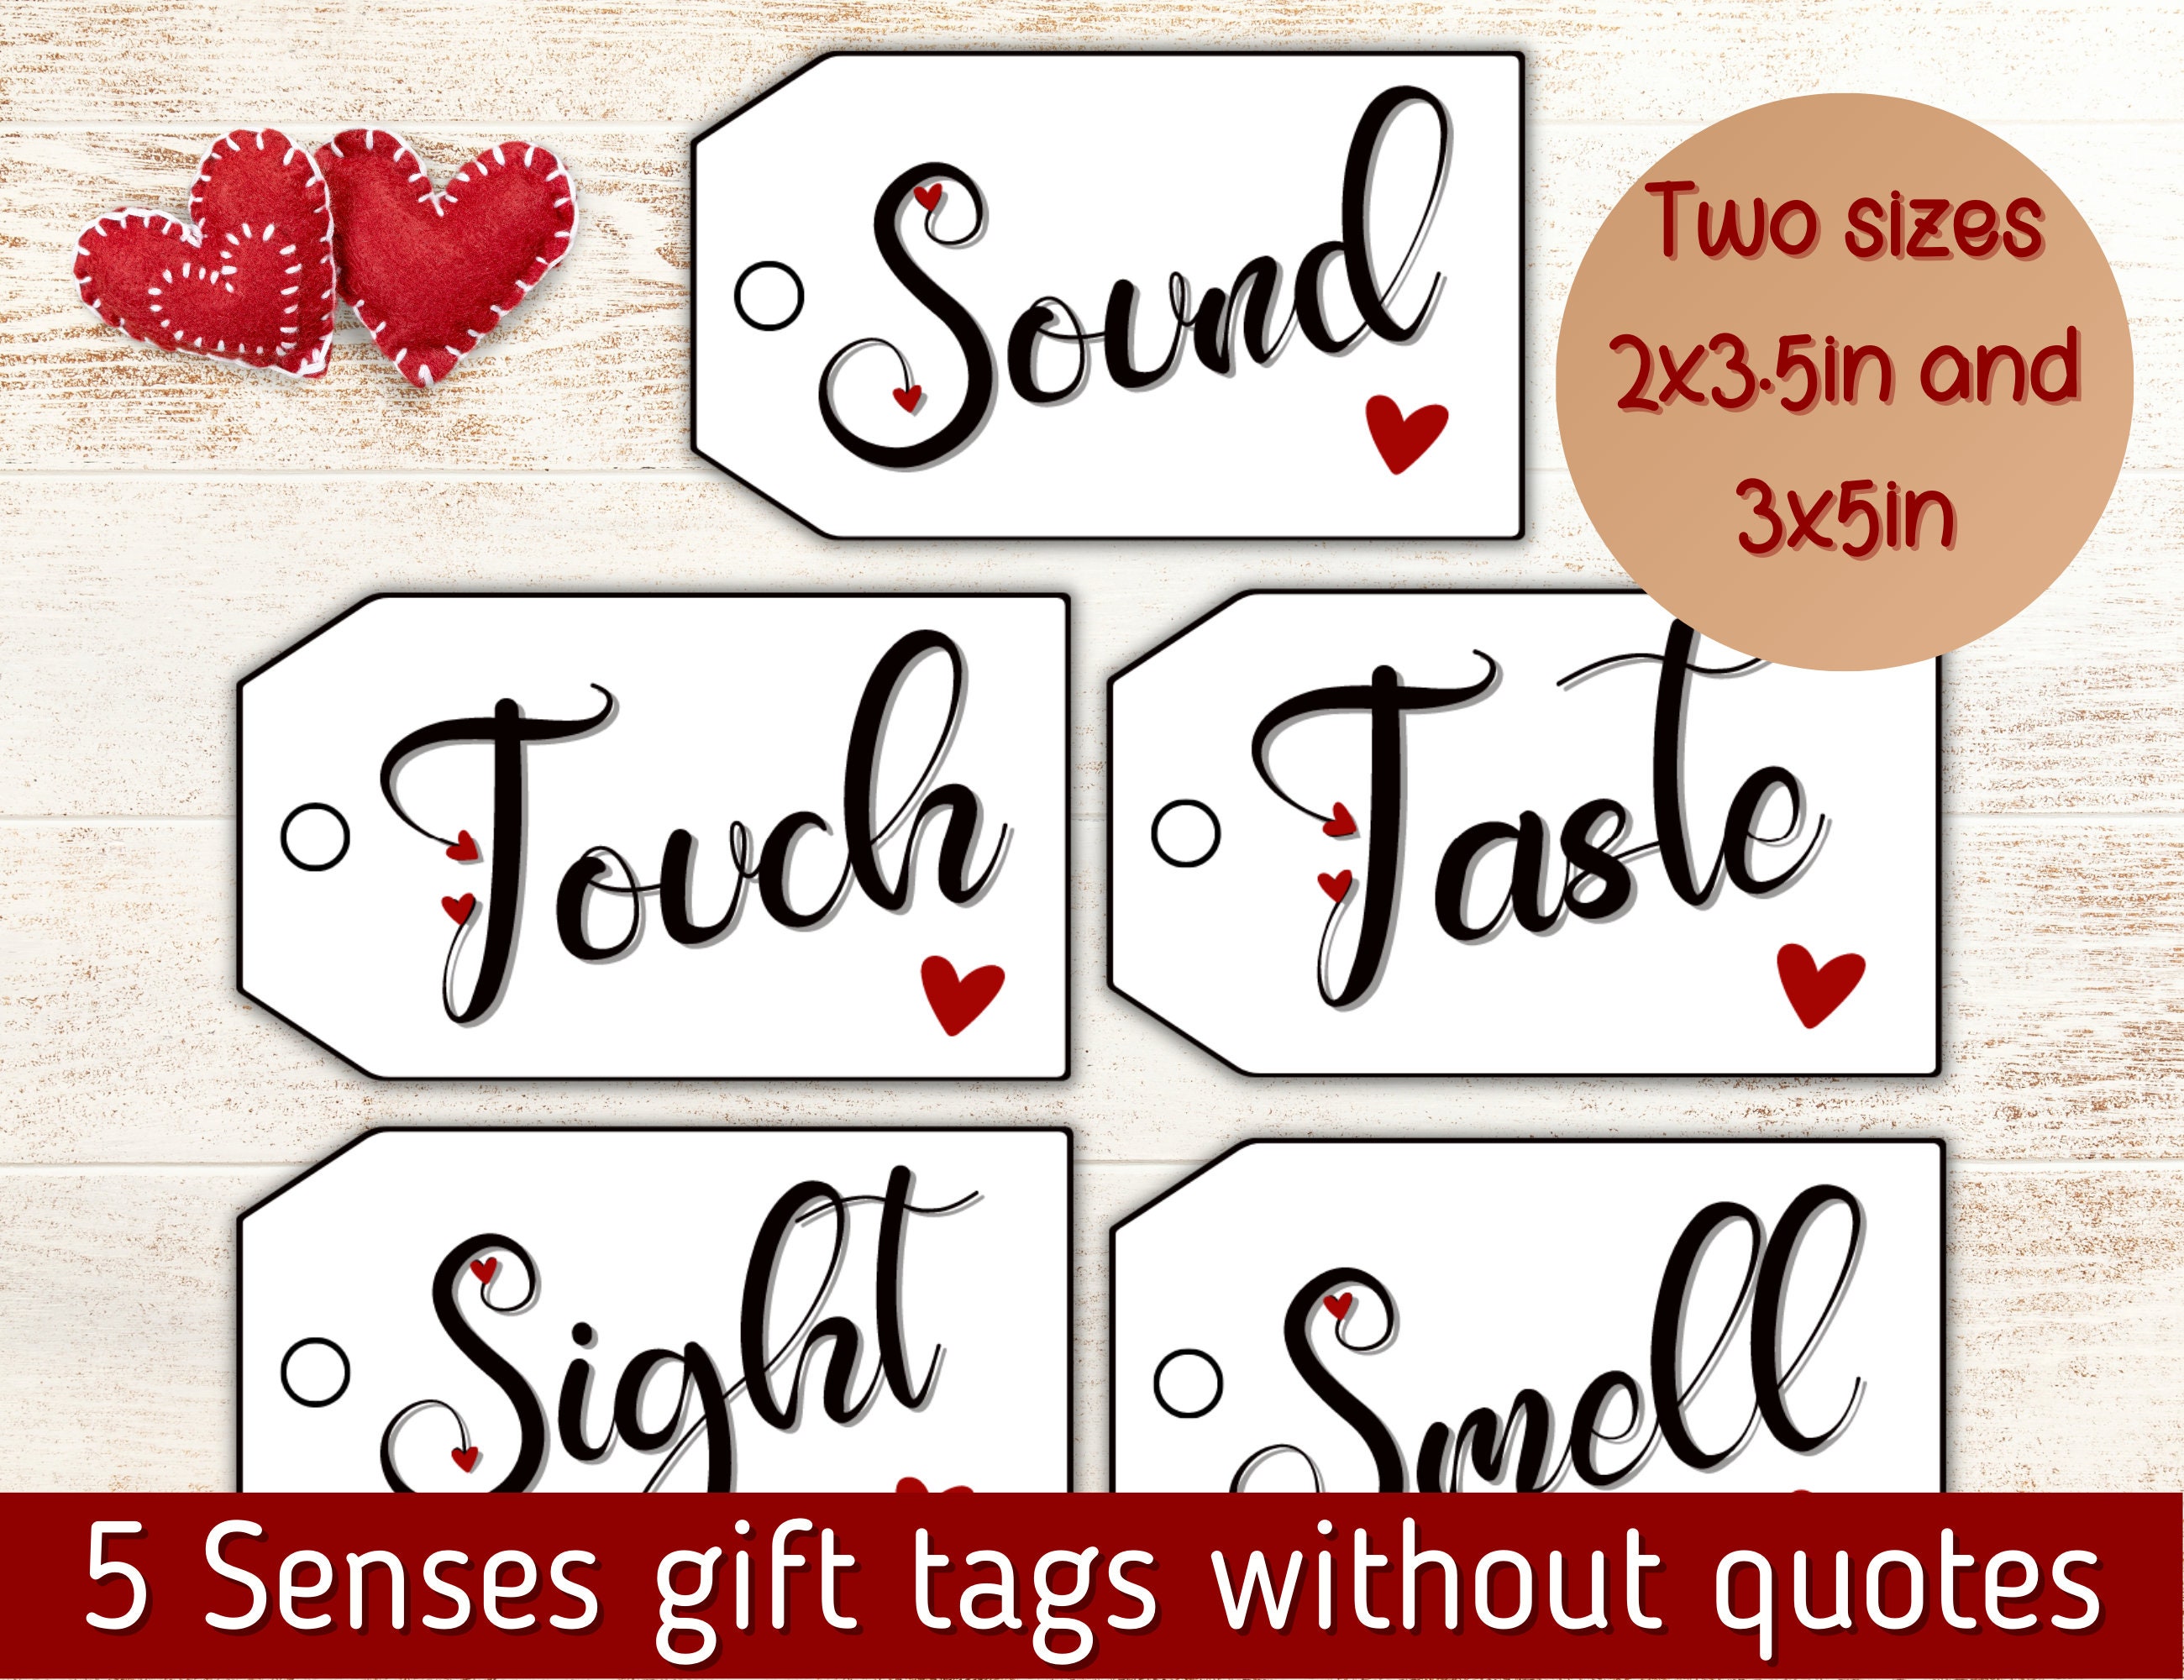 5 Senses Gift Ideas + Free Printable 5 Senses Gift Tags - Unique Gift Ideas  & More - The Expression a Personalization Mall Blog